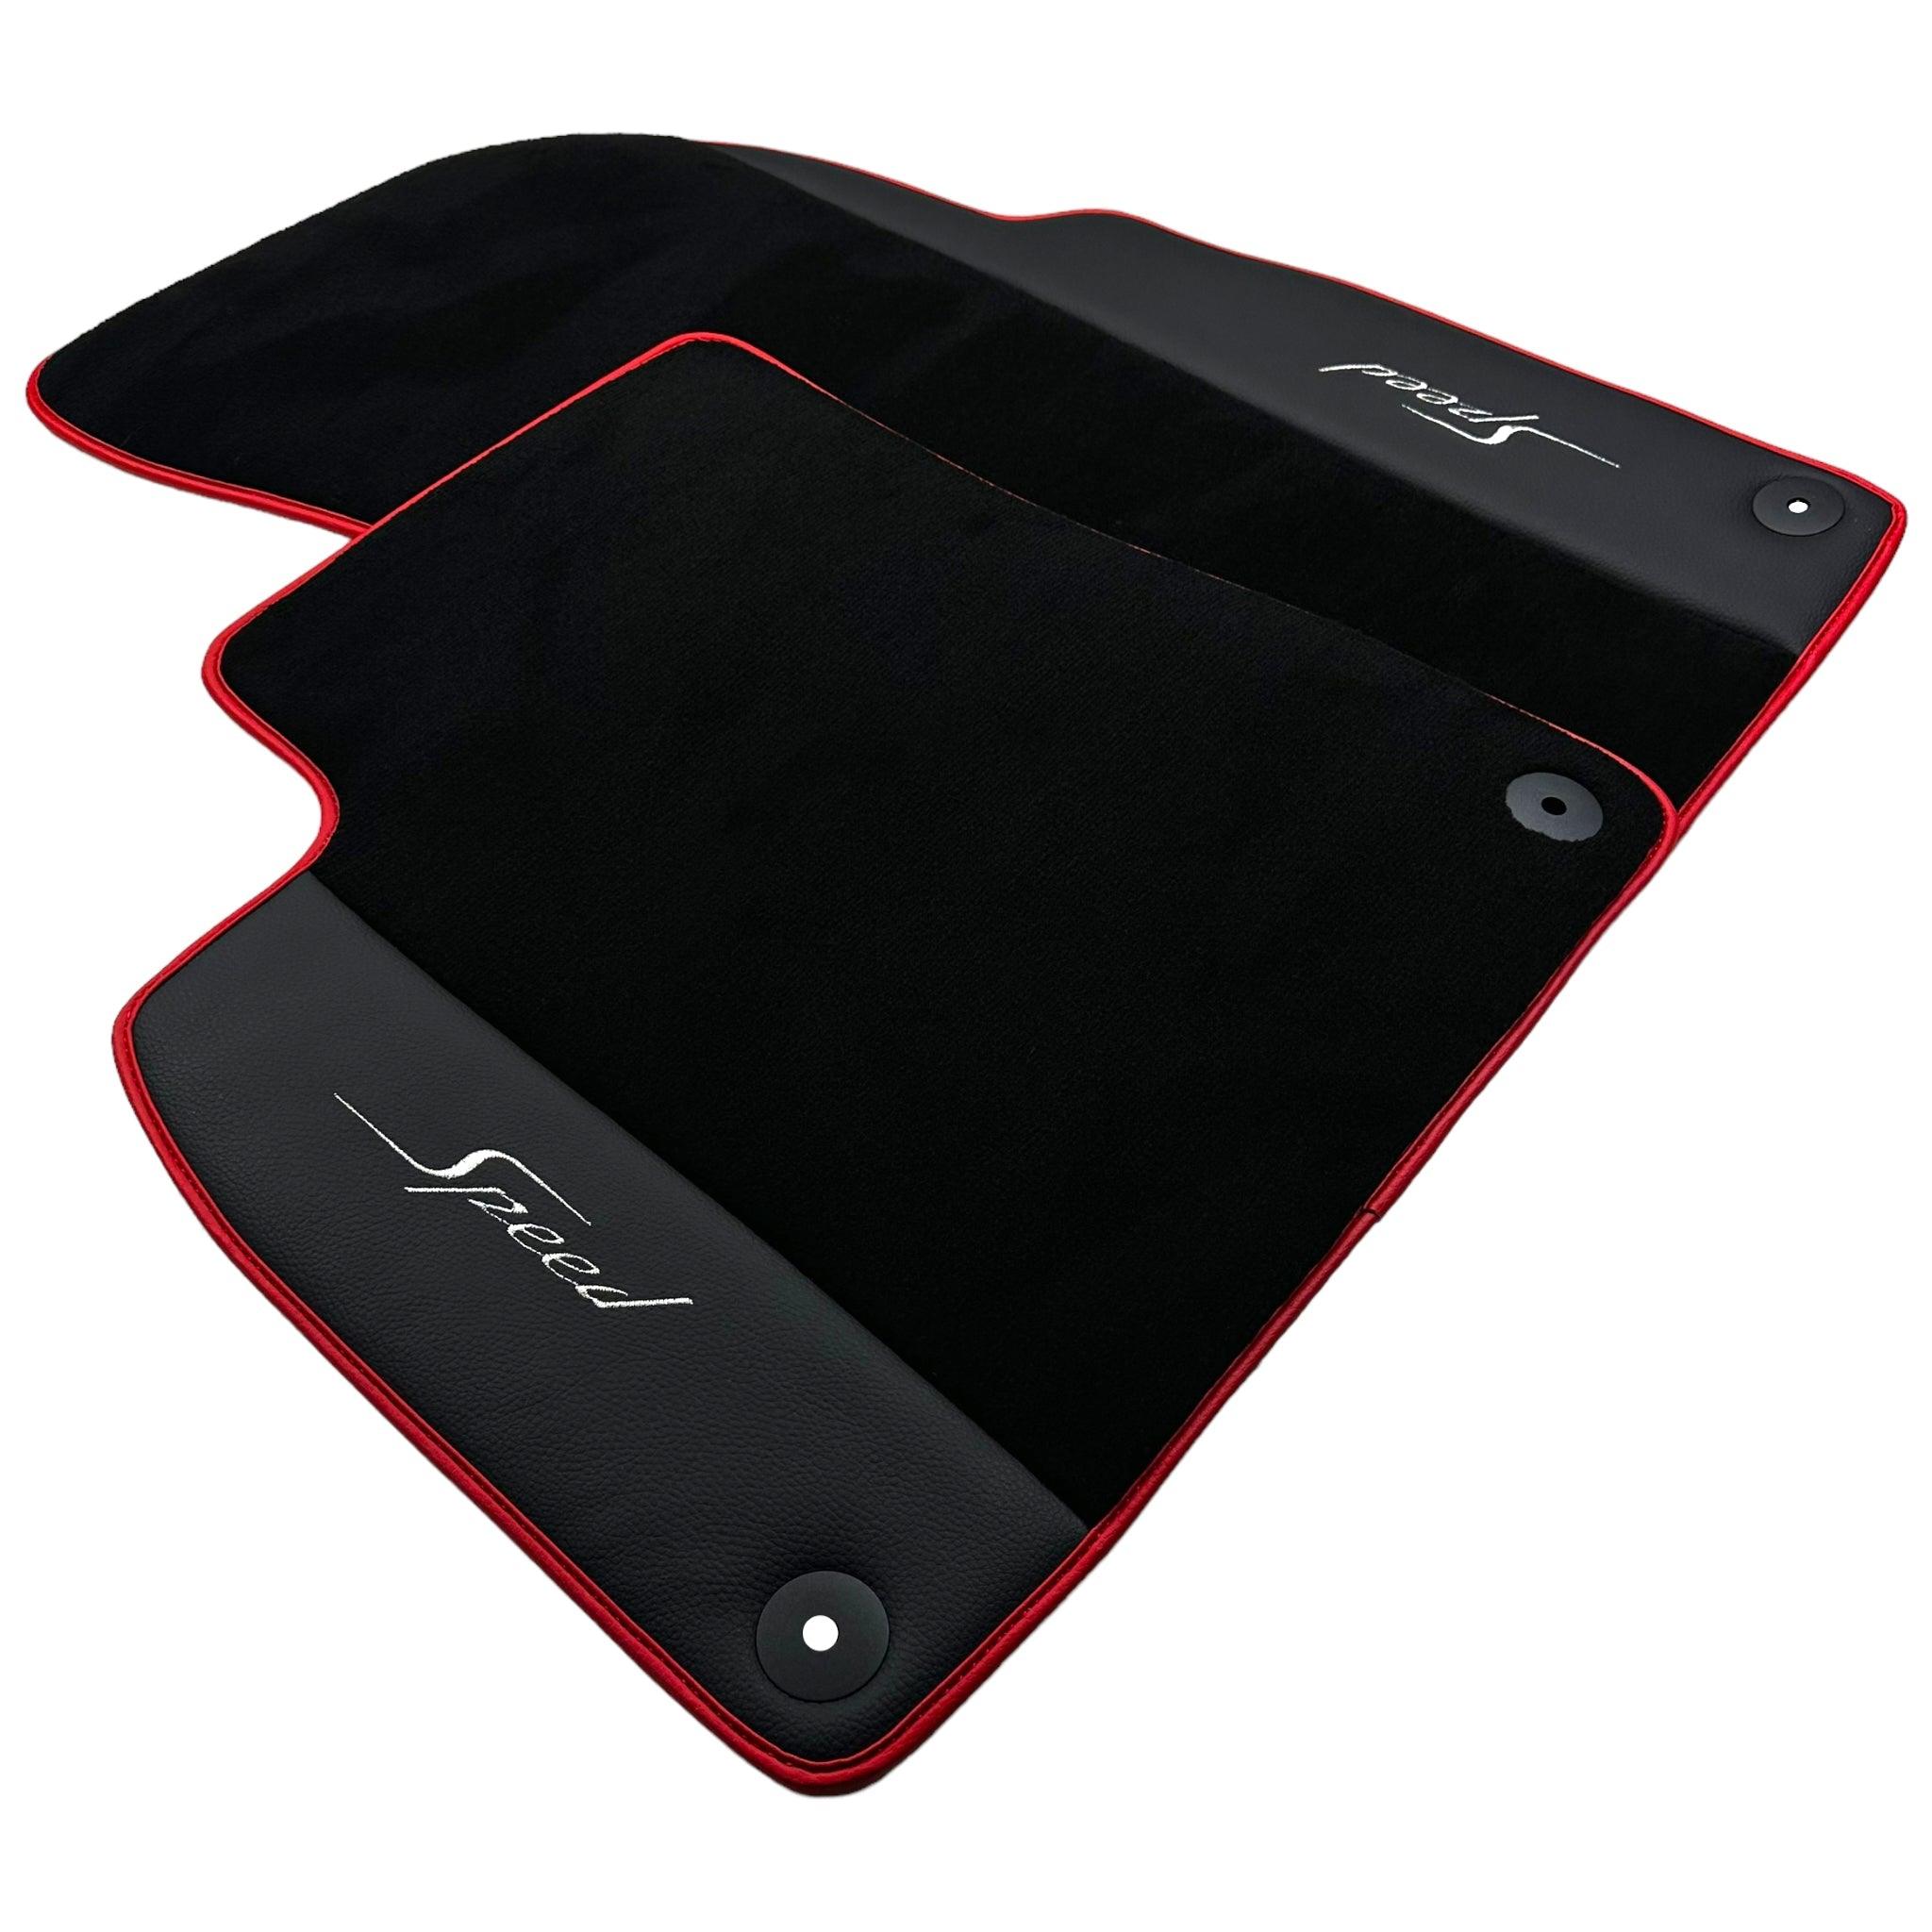 Floor Mats For Lamborghini Urus with Leather and Red Trim